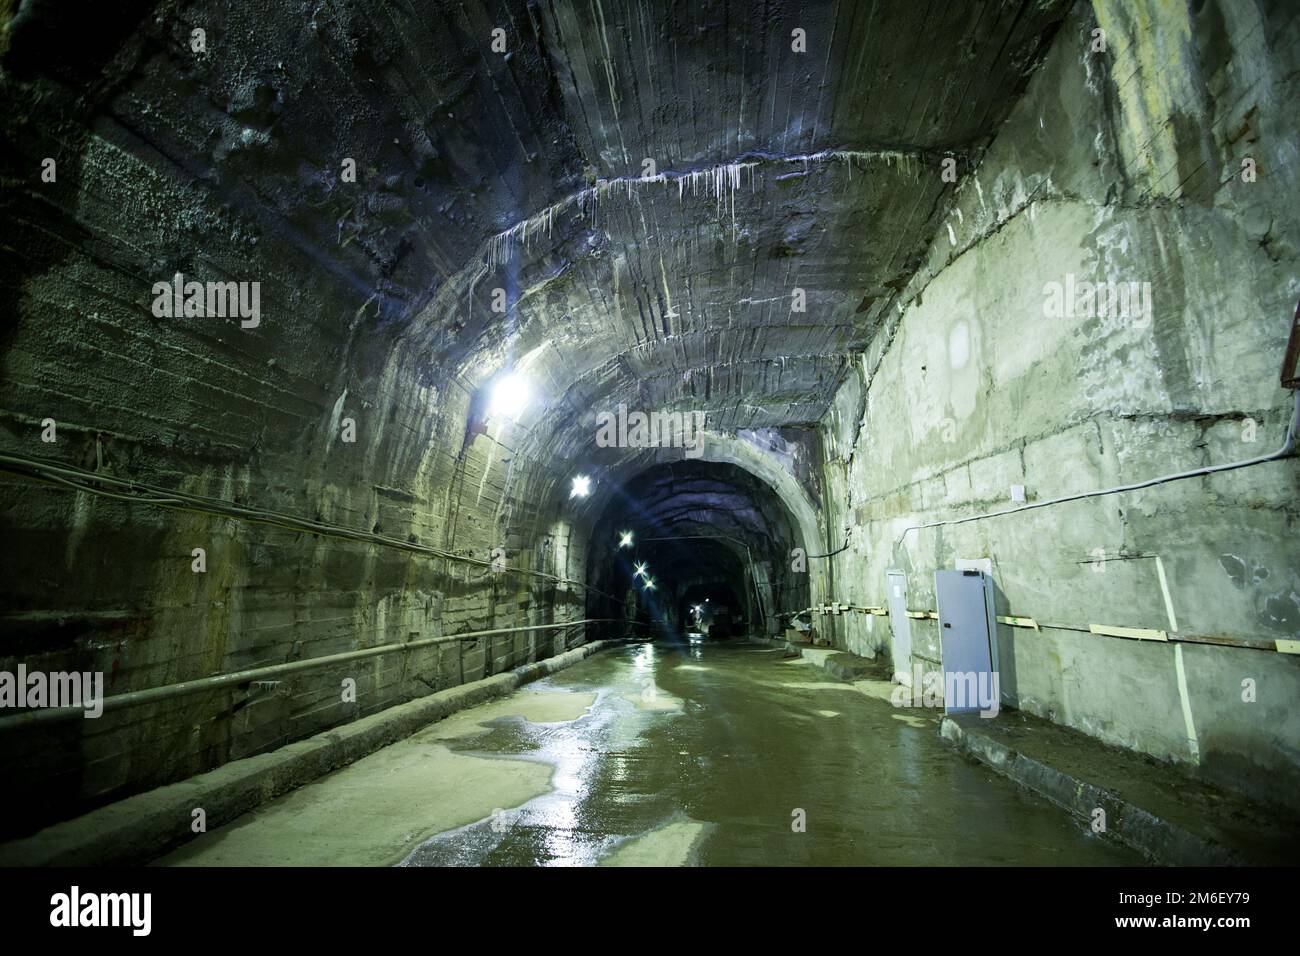 Kolyma hydroelectric station. Underground passages dug in the rock, under the large plate of the hydroelectric power station. Stock Photo